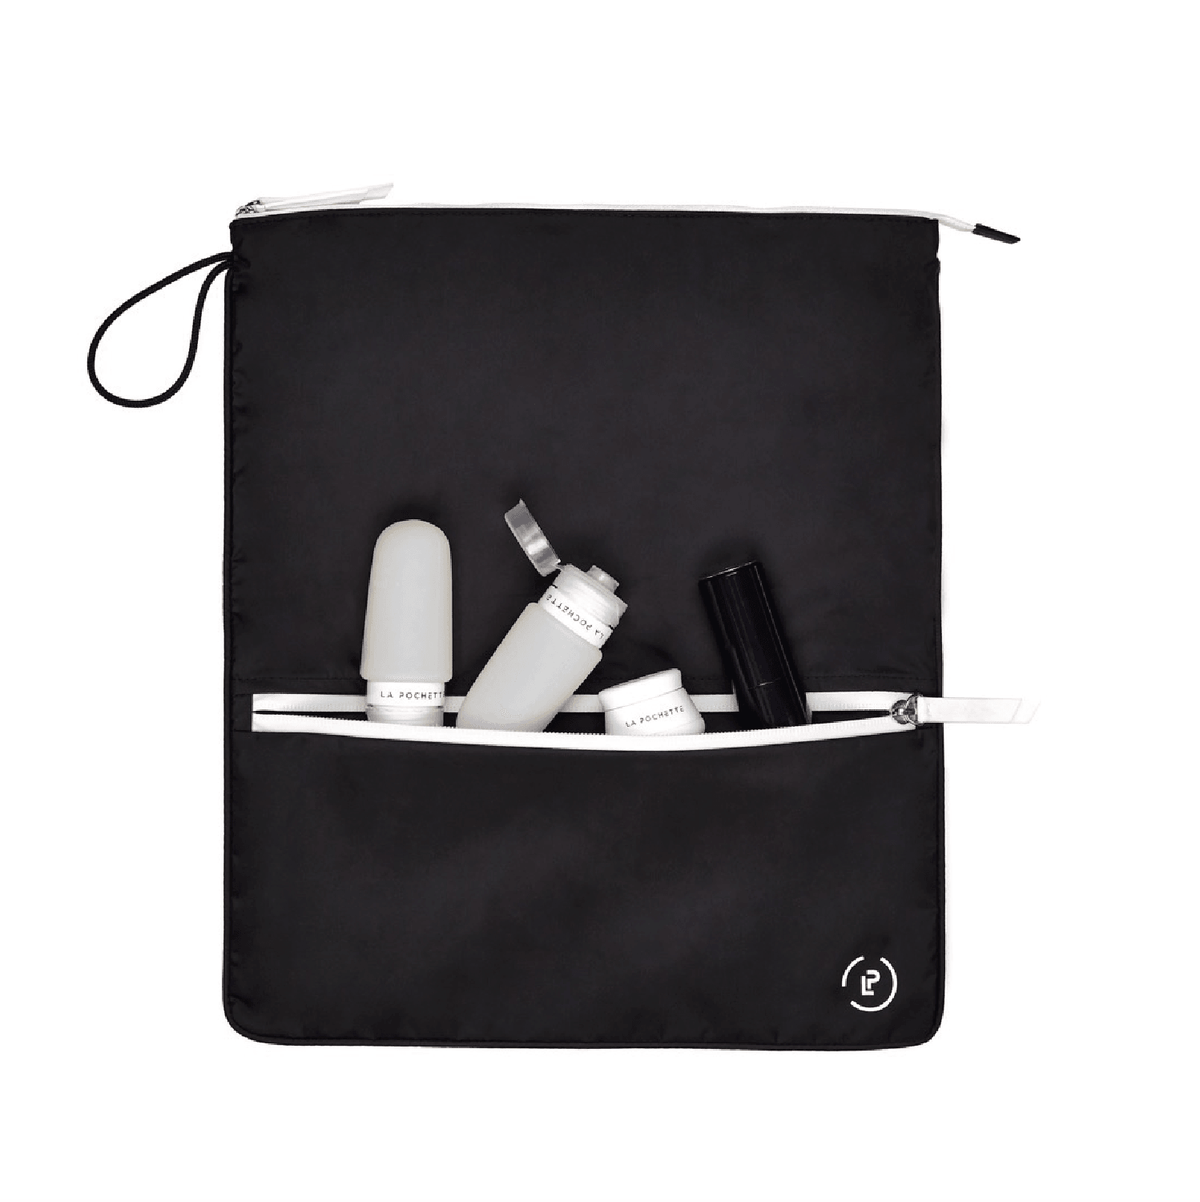 Ink White Sweat Bag, shown flat with Ink White Sweat Bag, shown flat and with two La Pochette silicone travel bottles resting on top and in front pocket